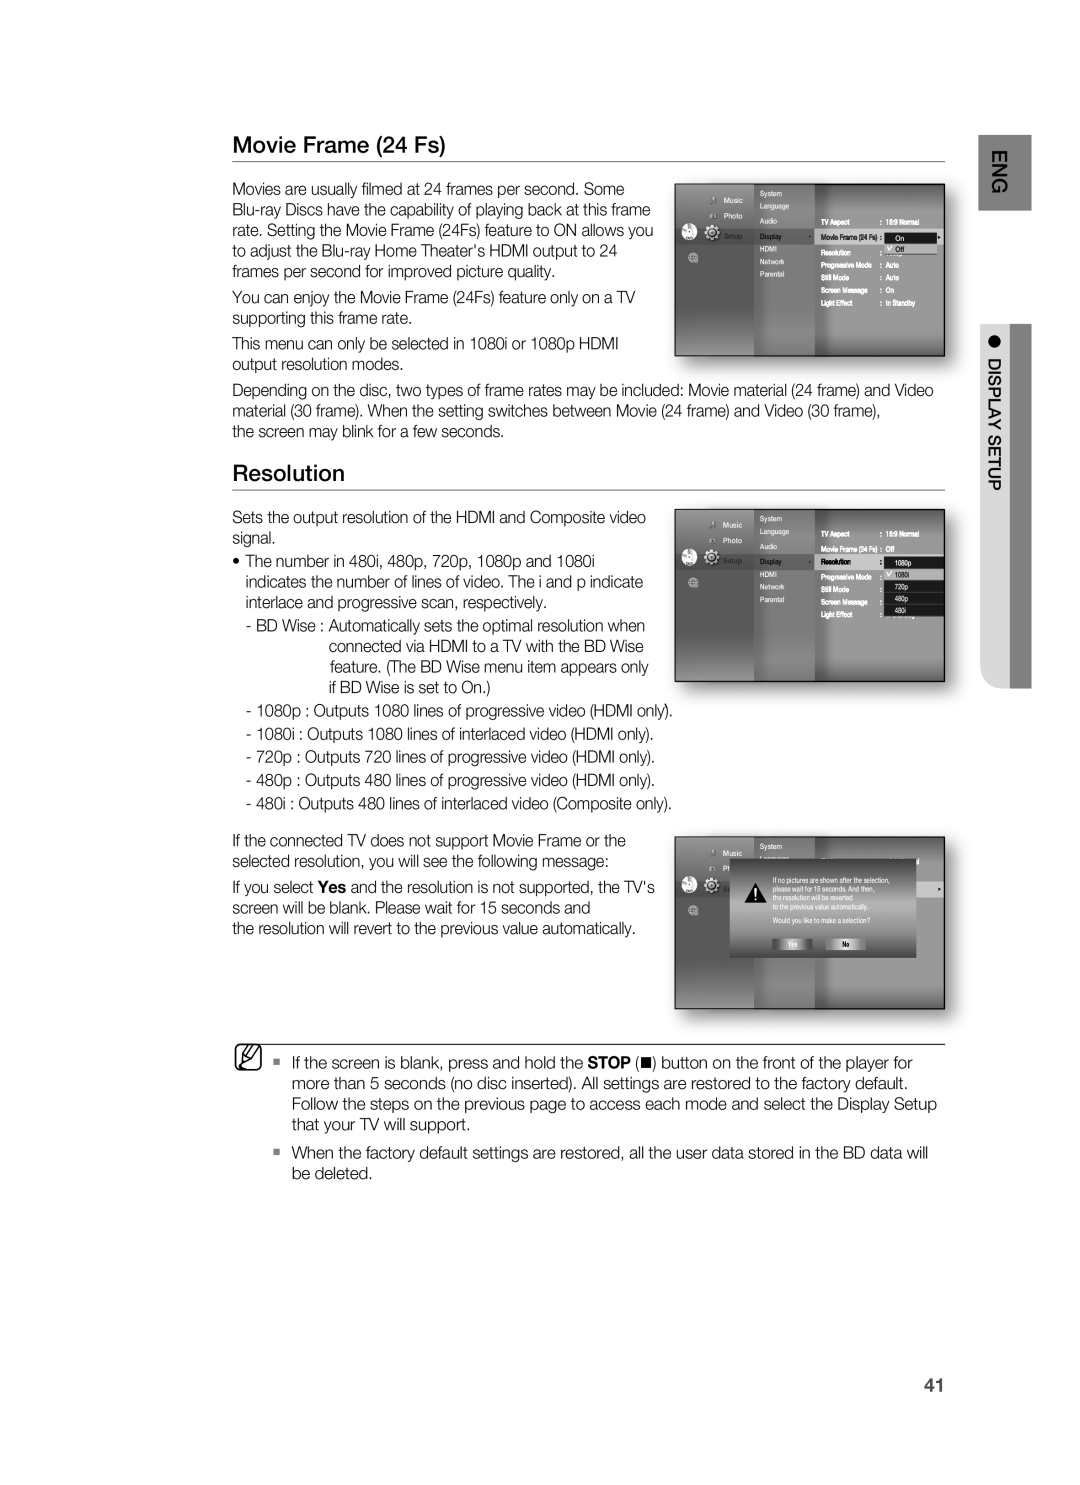 Samsung HT-BD8200 user manual Movie Frame 24 Fs, Resolution, to adjust the Blu-rayHome Theaters HDMI output to 